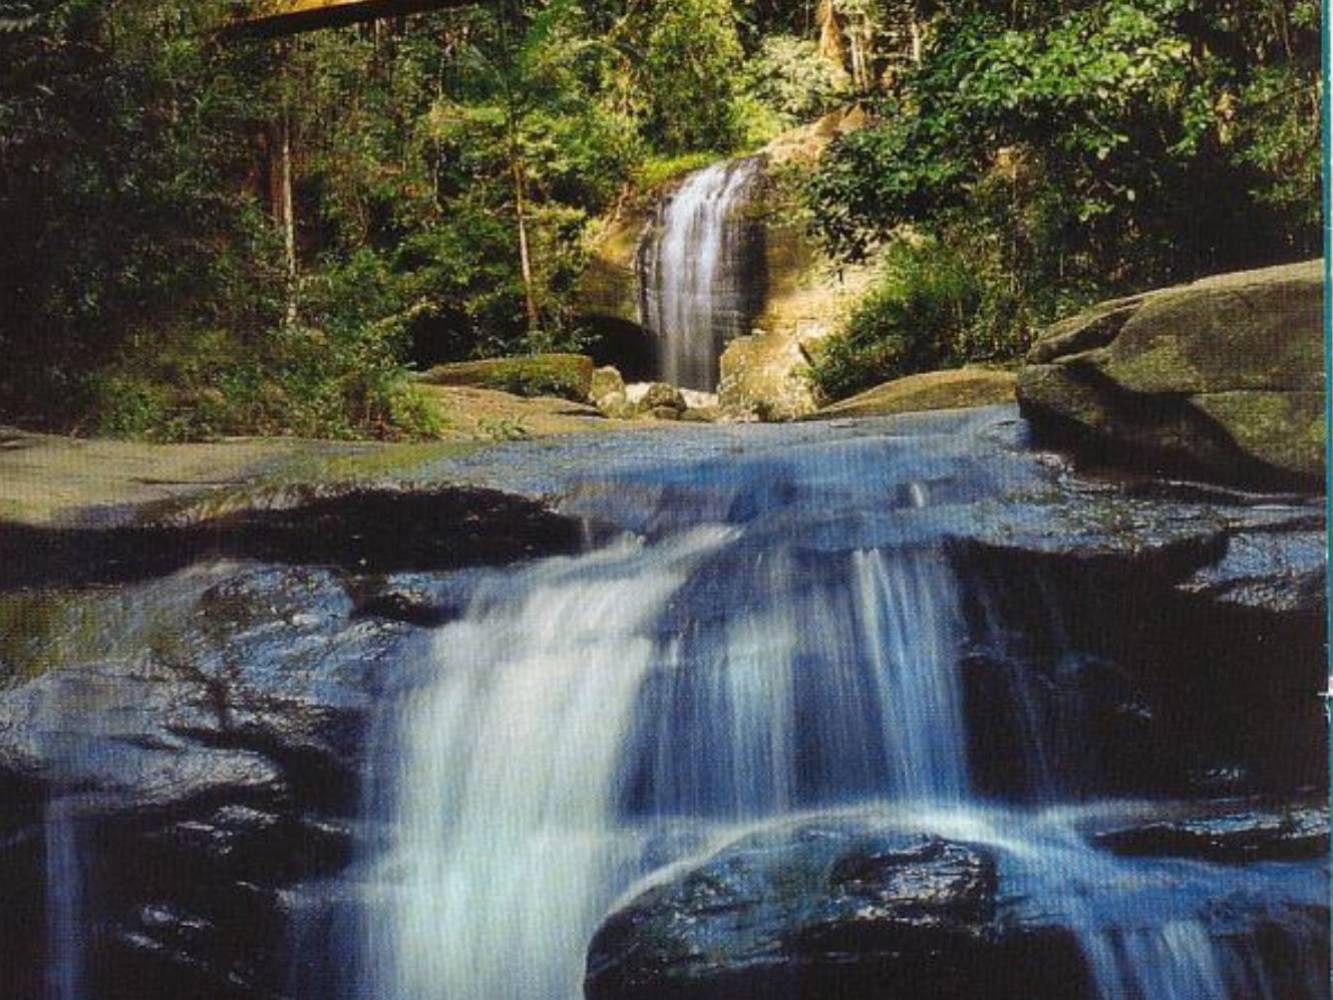 Waterfall at Buderim Forest Park